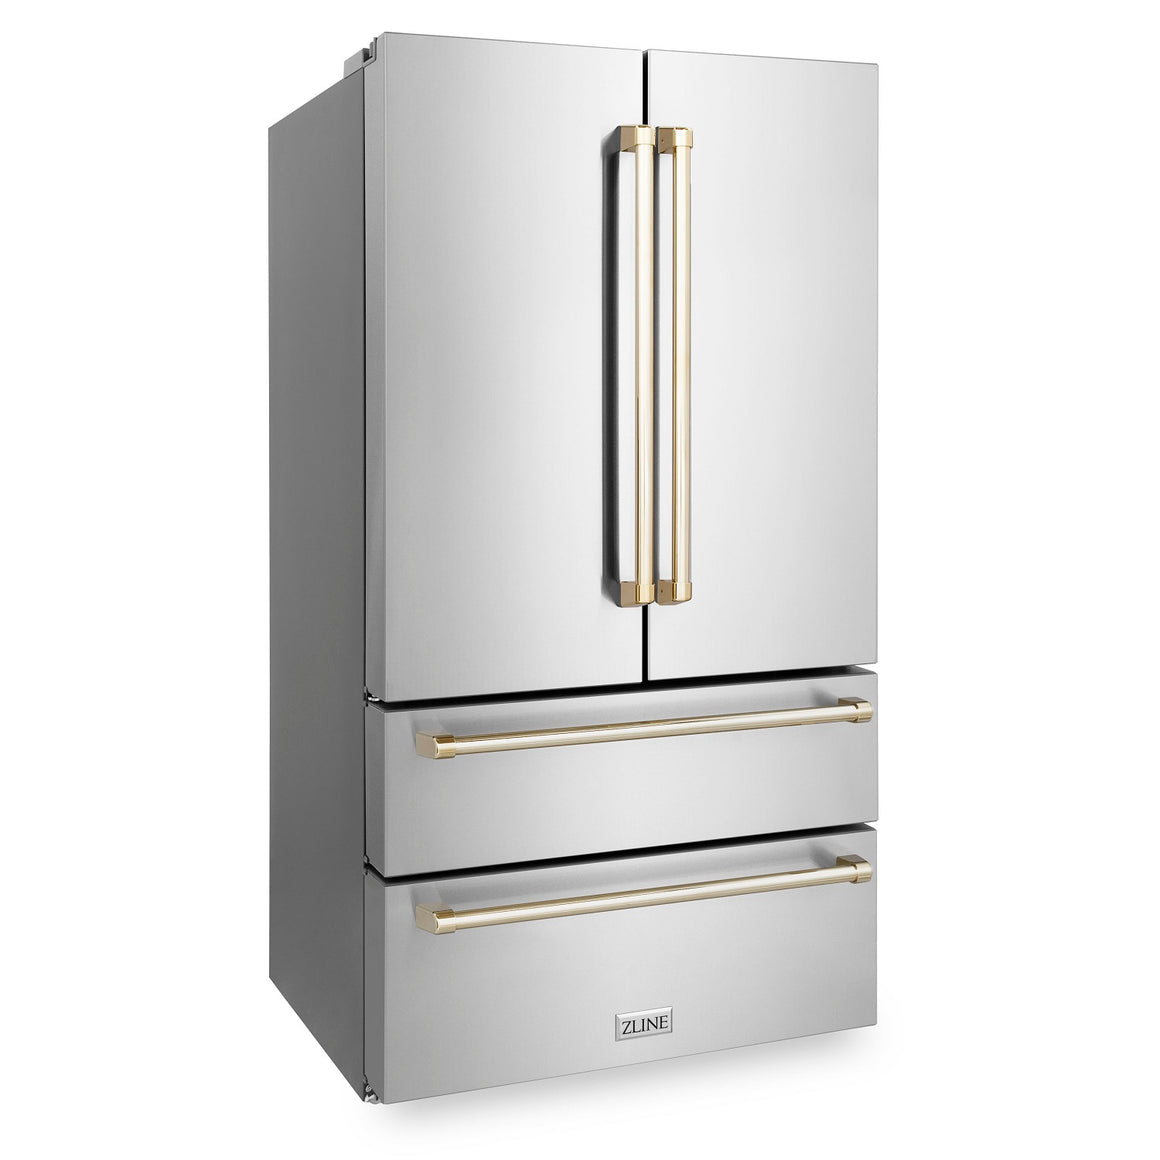 ZLINE 36" Autograph Edition 22.5 cu. ft French Door Refrigerator with Ice Maker in Fingerprint Resistant Stainless Steel with Gold Accents